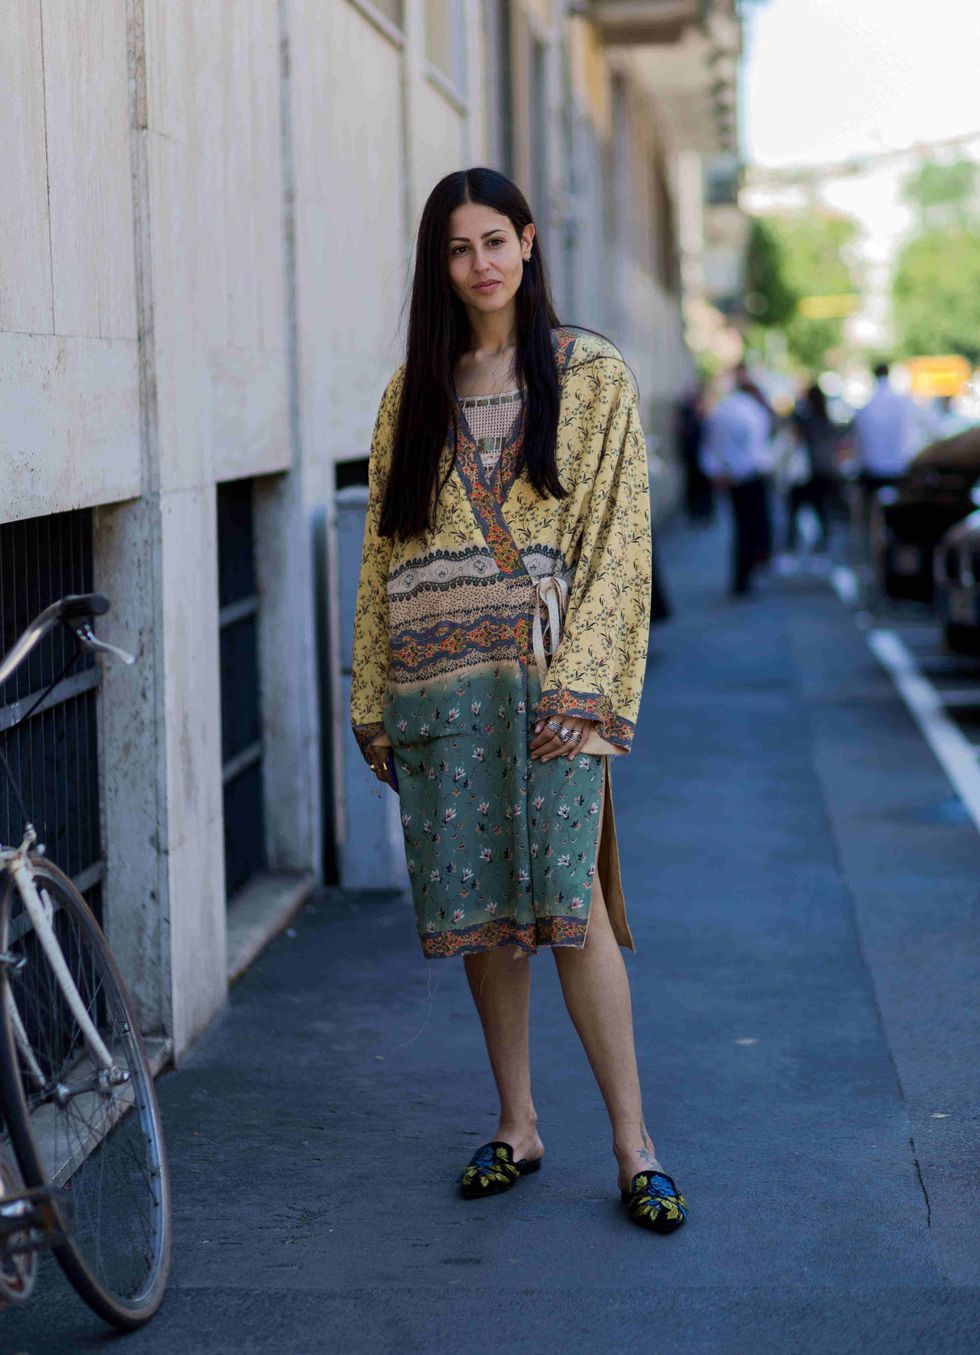 MILAN, ITALY - JUNE 20: Gilda Ambrosio wearing a boho dress outside Etro during the Milan Men's Fashion Week Spring/Summer 2017 on June 20, 2016 in Milan, Italy. (Photo by Christian Vierig/Getty Images)